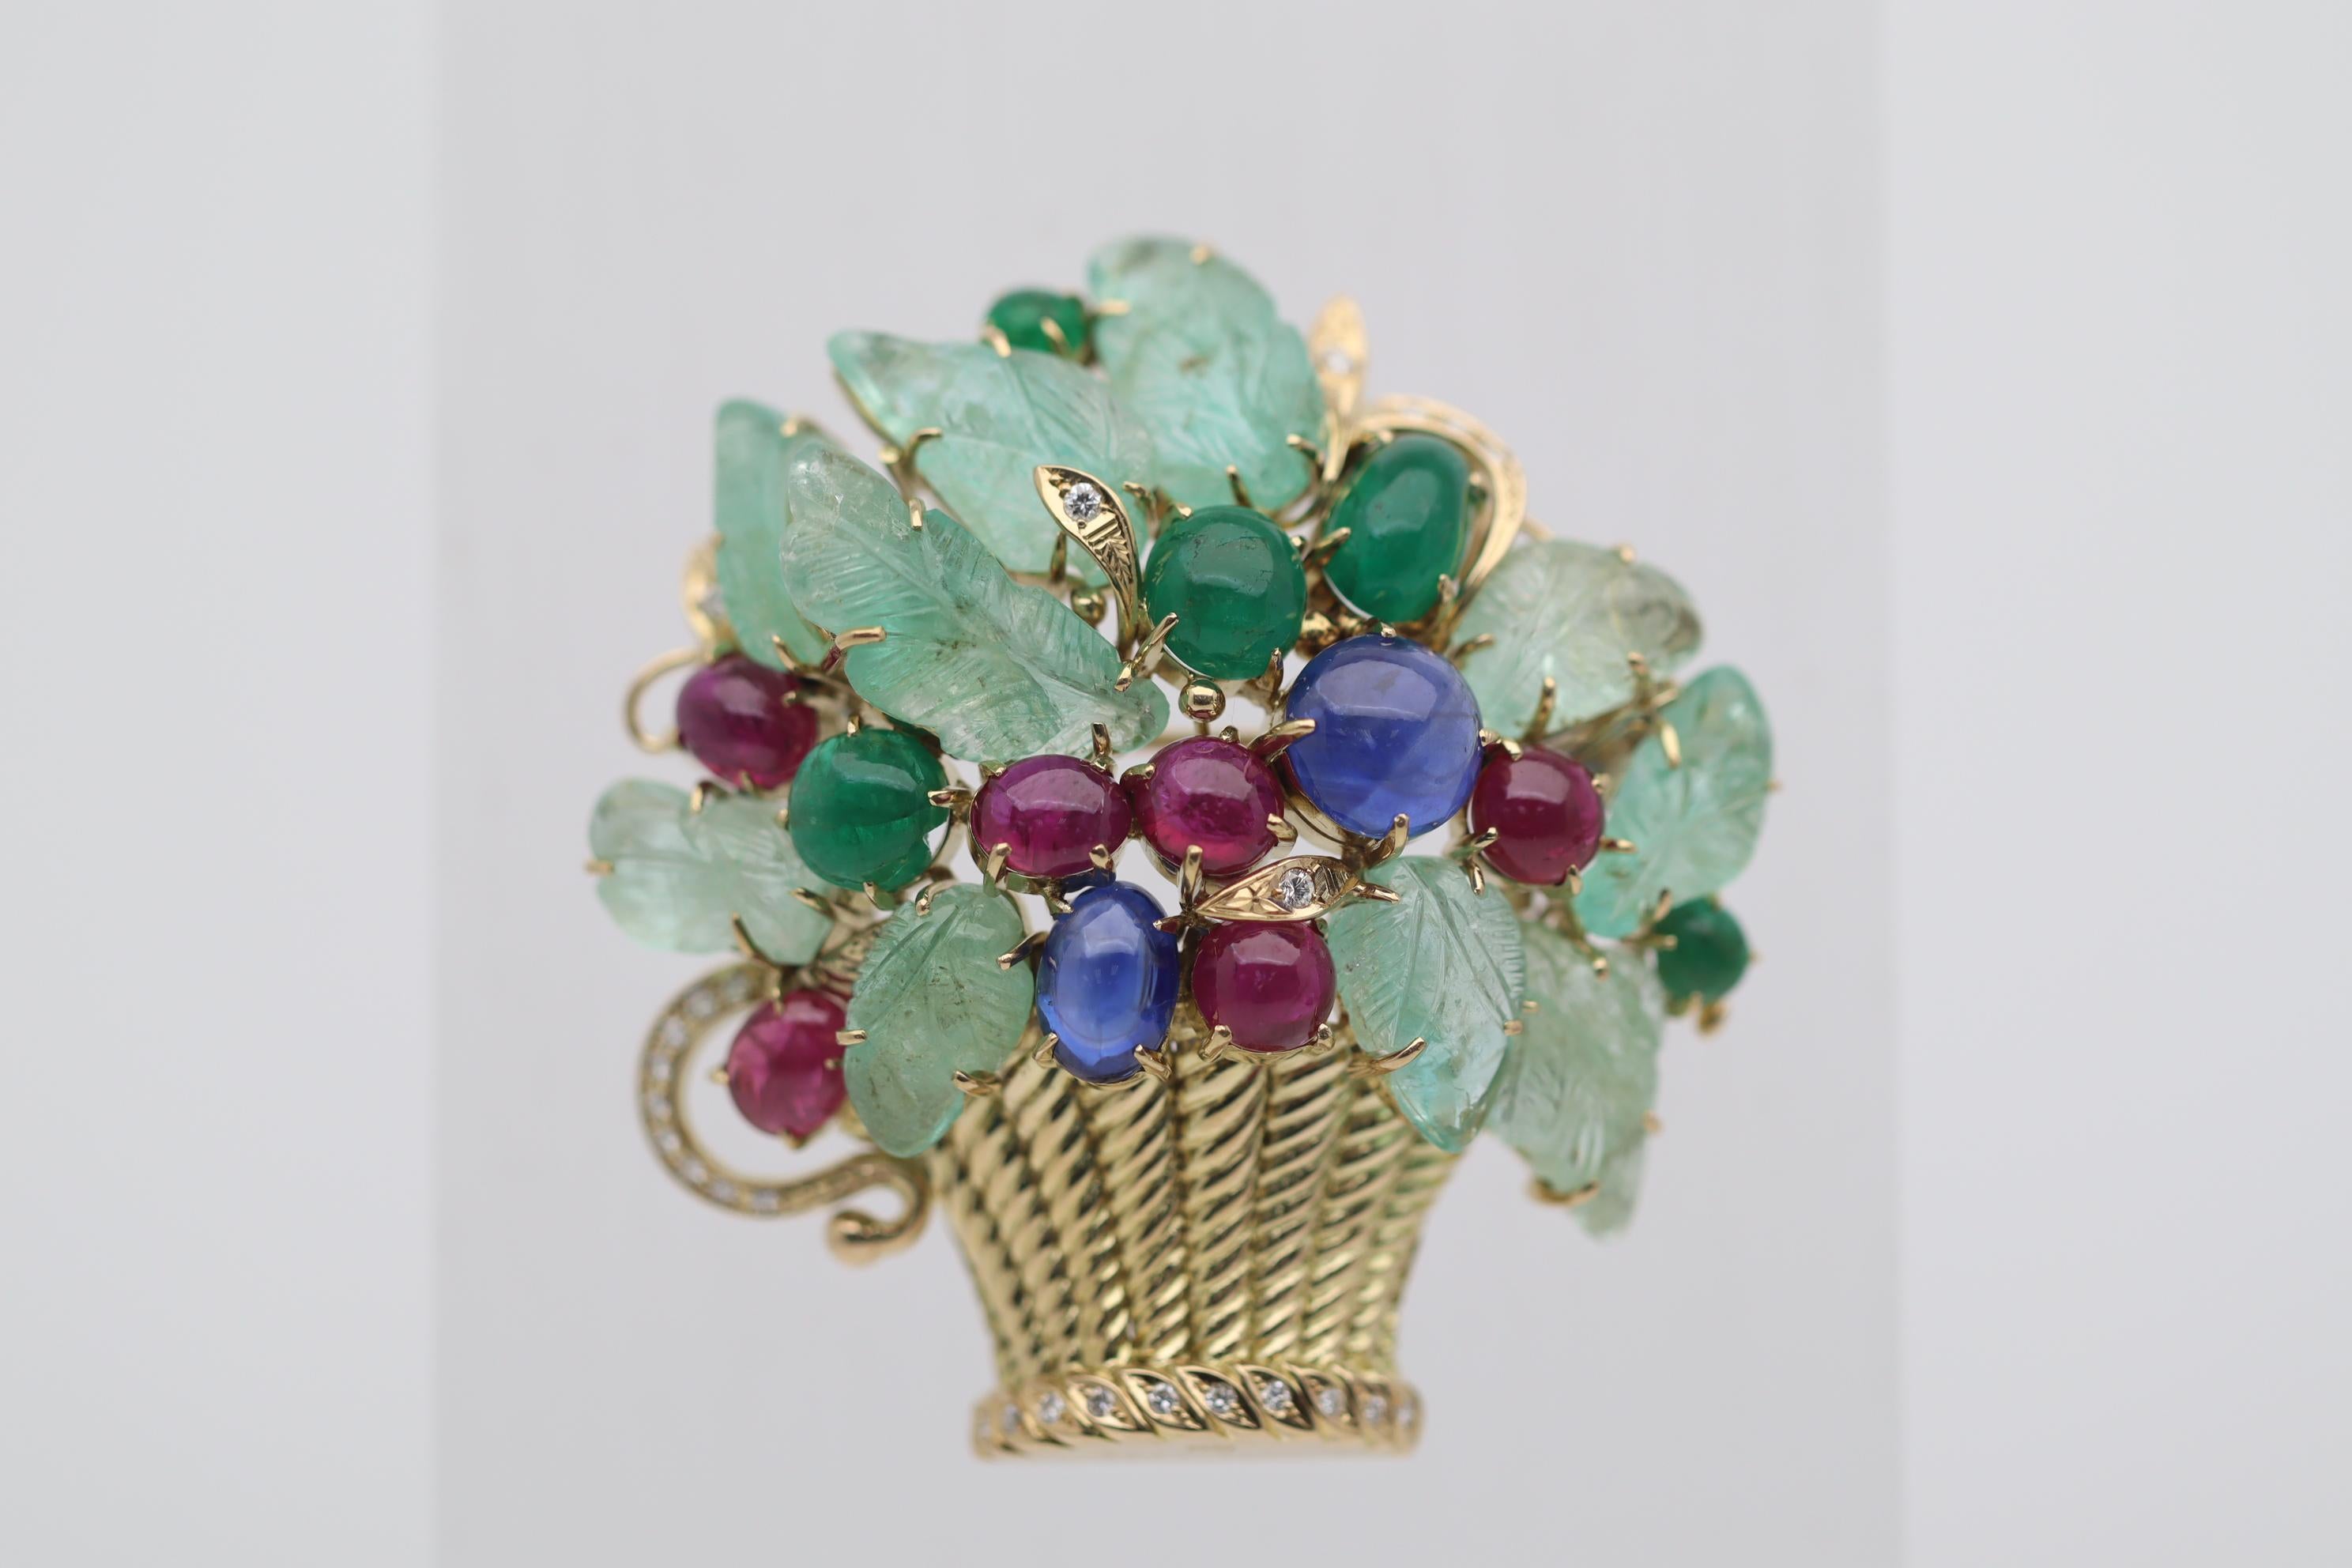 A fantastical deco-style Tutti Frutti brooch featuring large carved and cabochon emeralds along with cabochon rubies, sapphires, each having rich intense color which contrast and complement each other. There are 0.27 carats of round brilliant-cut